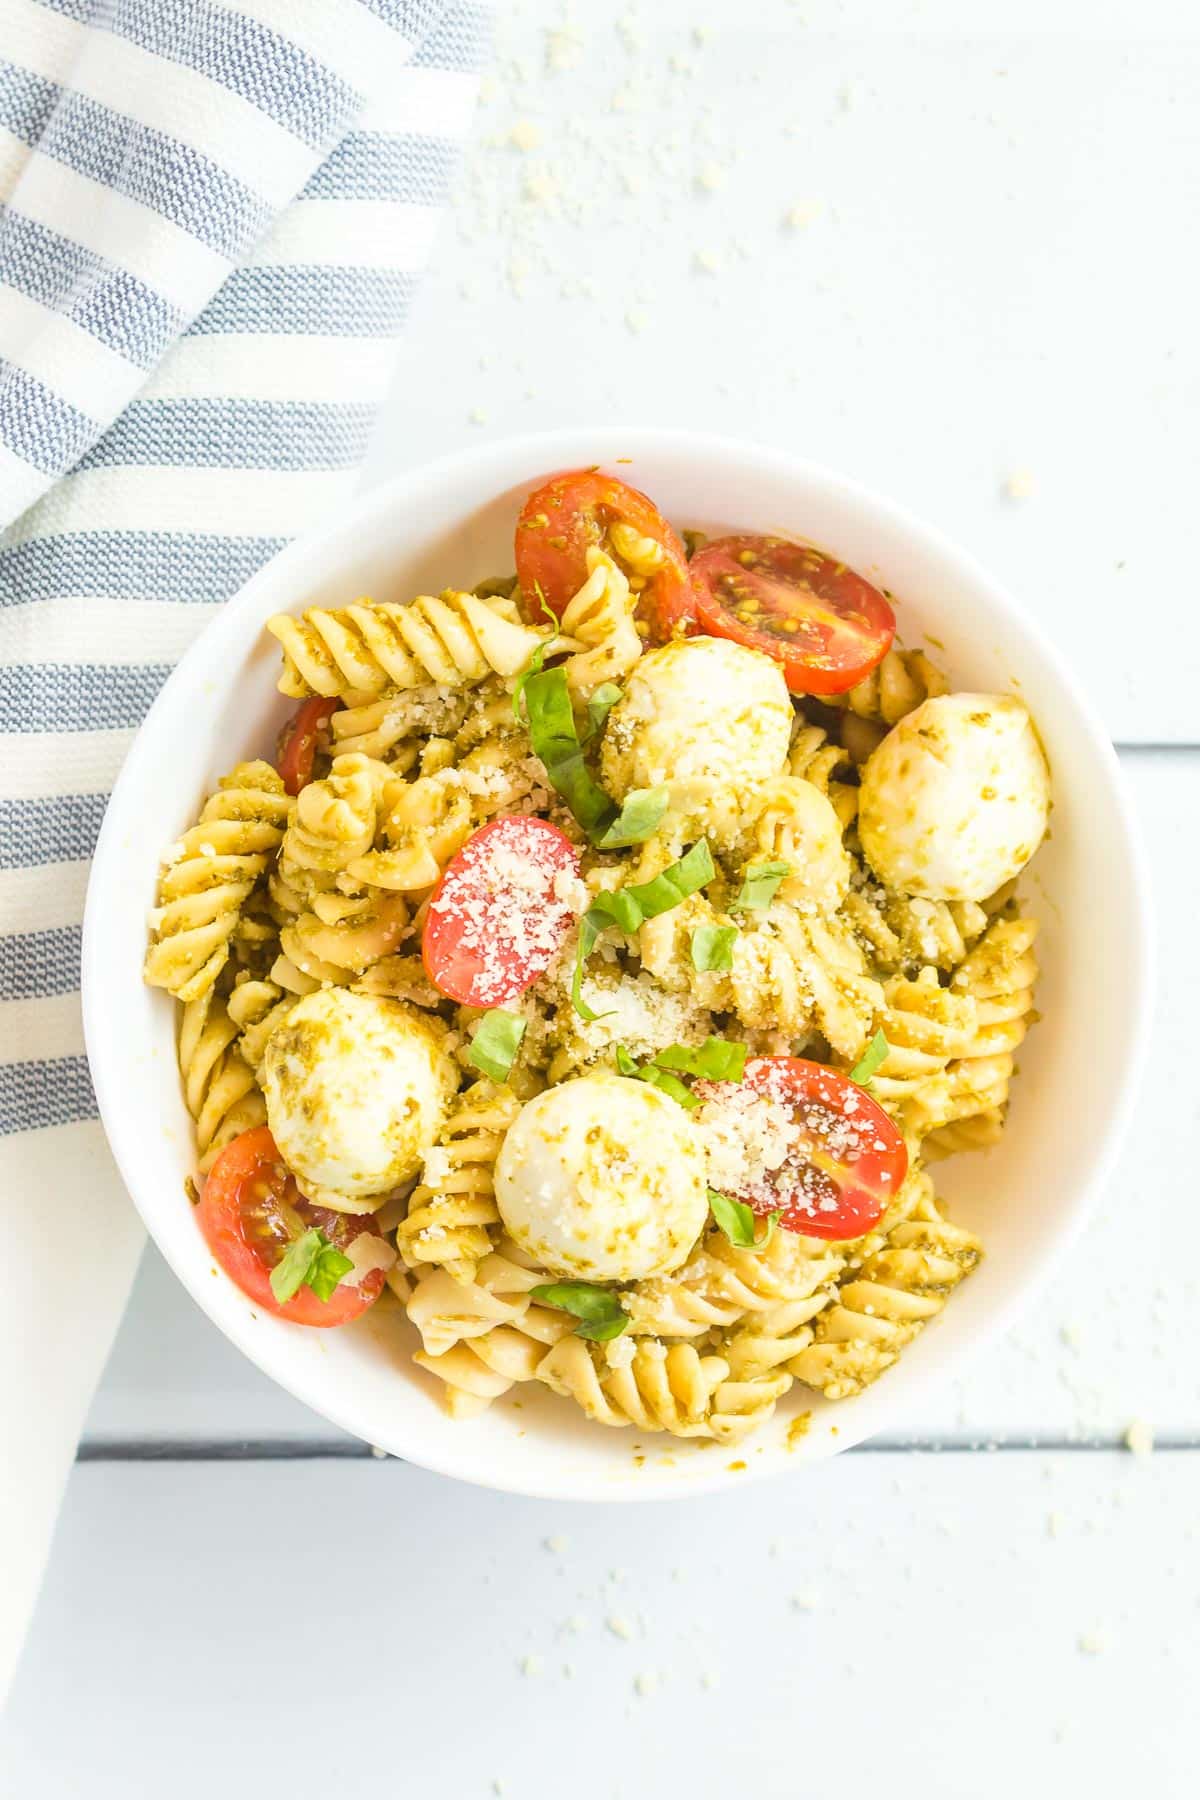 A bowl of pasta salad with cherry tomatoes, mozzarella balls, fresh basil, and sprinkled with grated parmesan cheese, next to a striped cloth on a white table.